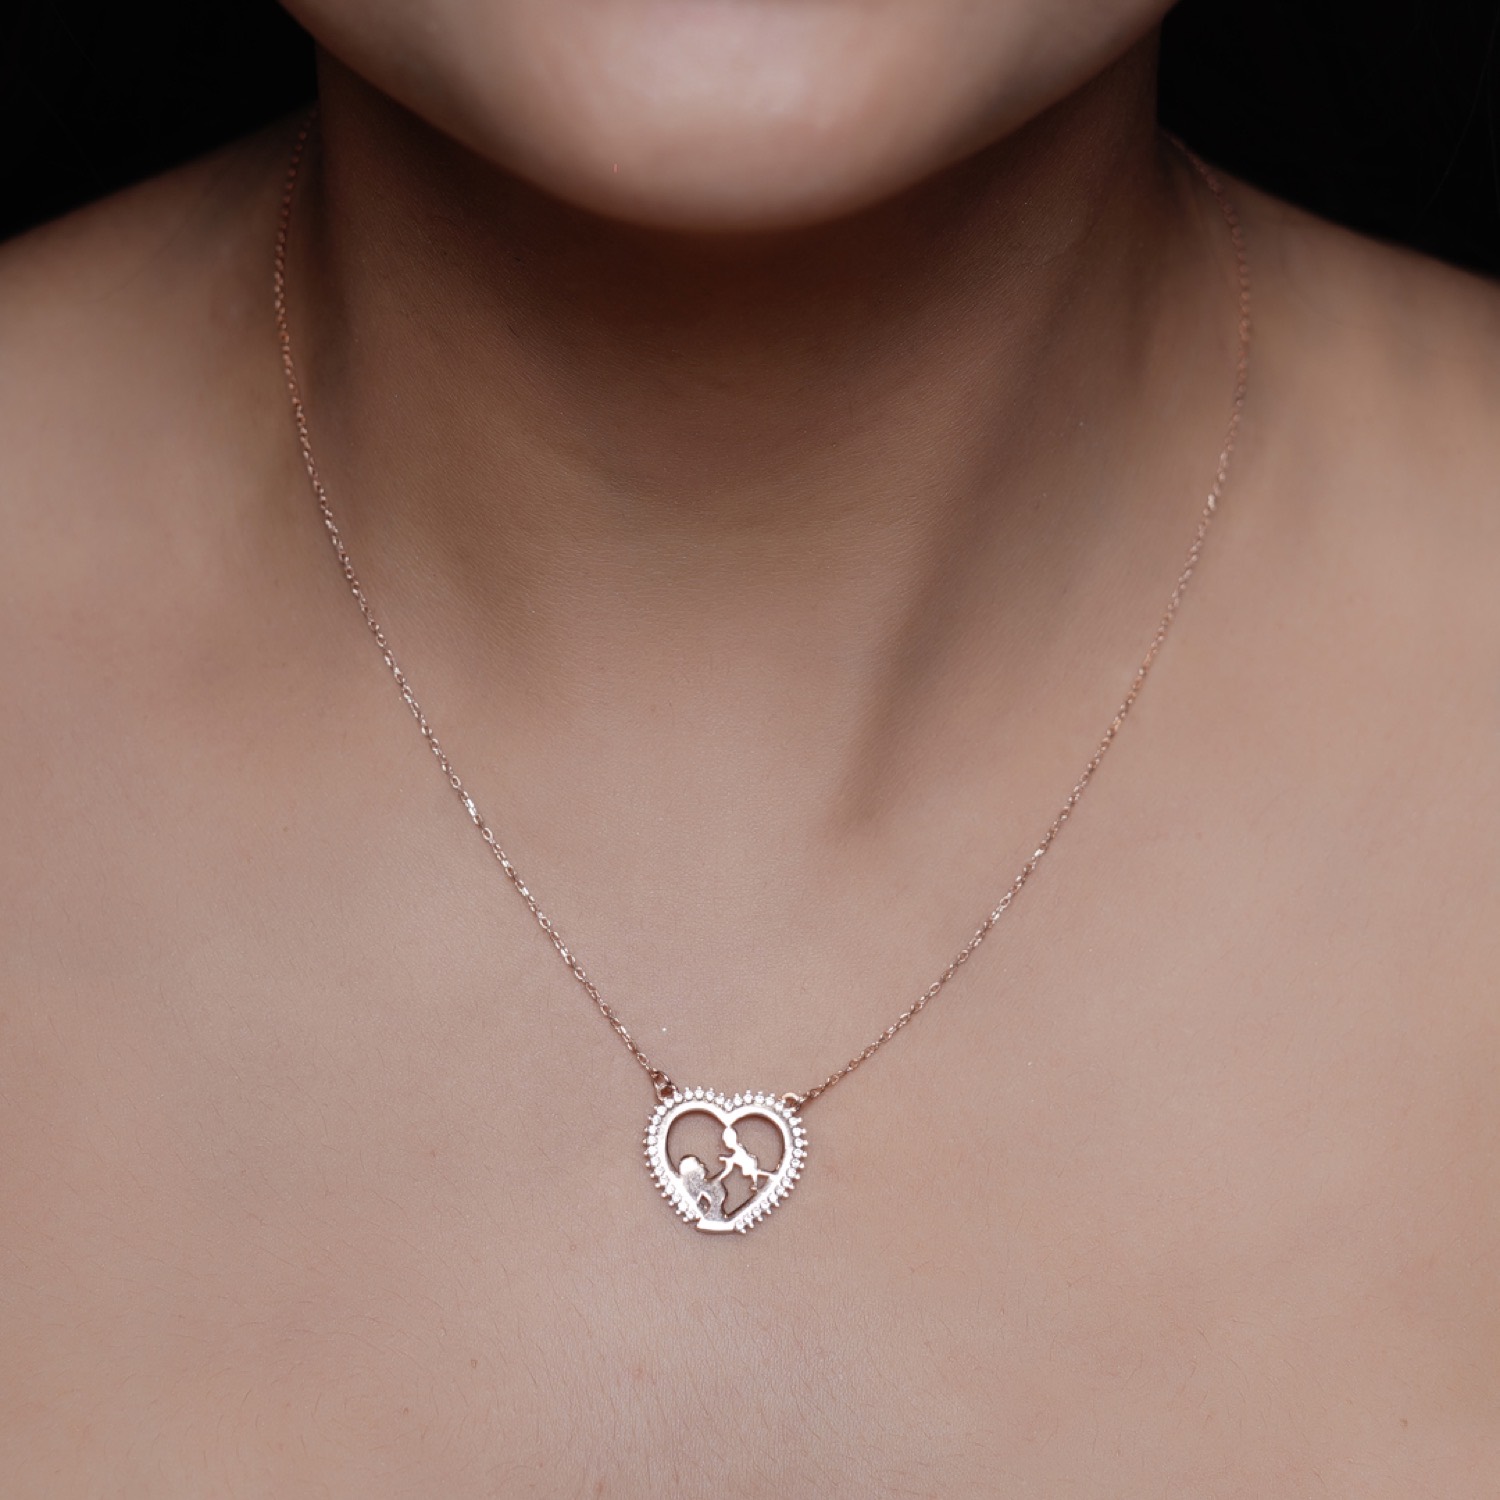 varam_chain_102022_mom_and_baby_inside_heart_pendant_rose_gold_silver_chain-2